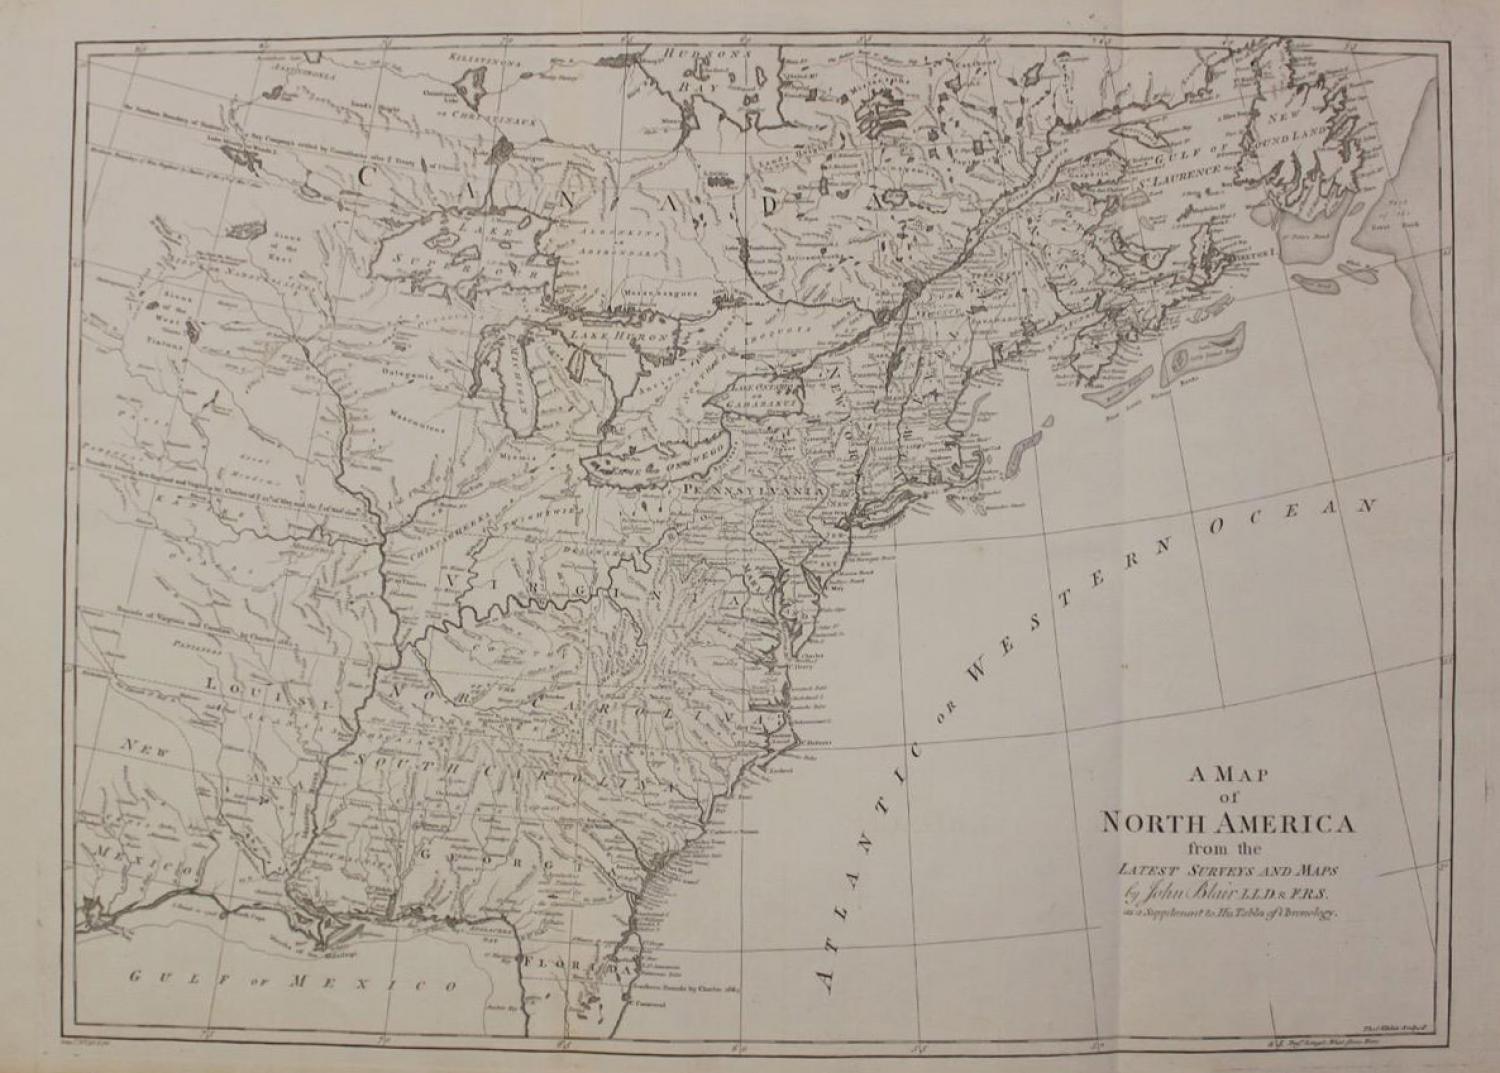 Blair - A Map of North America from the Lates